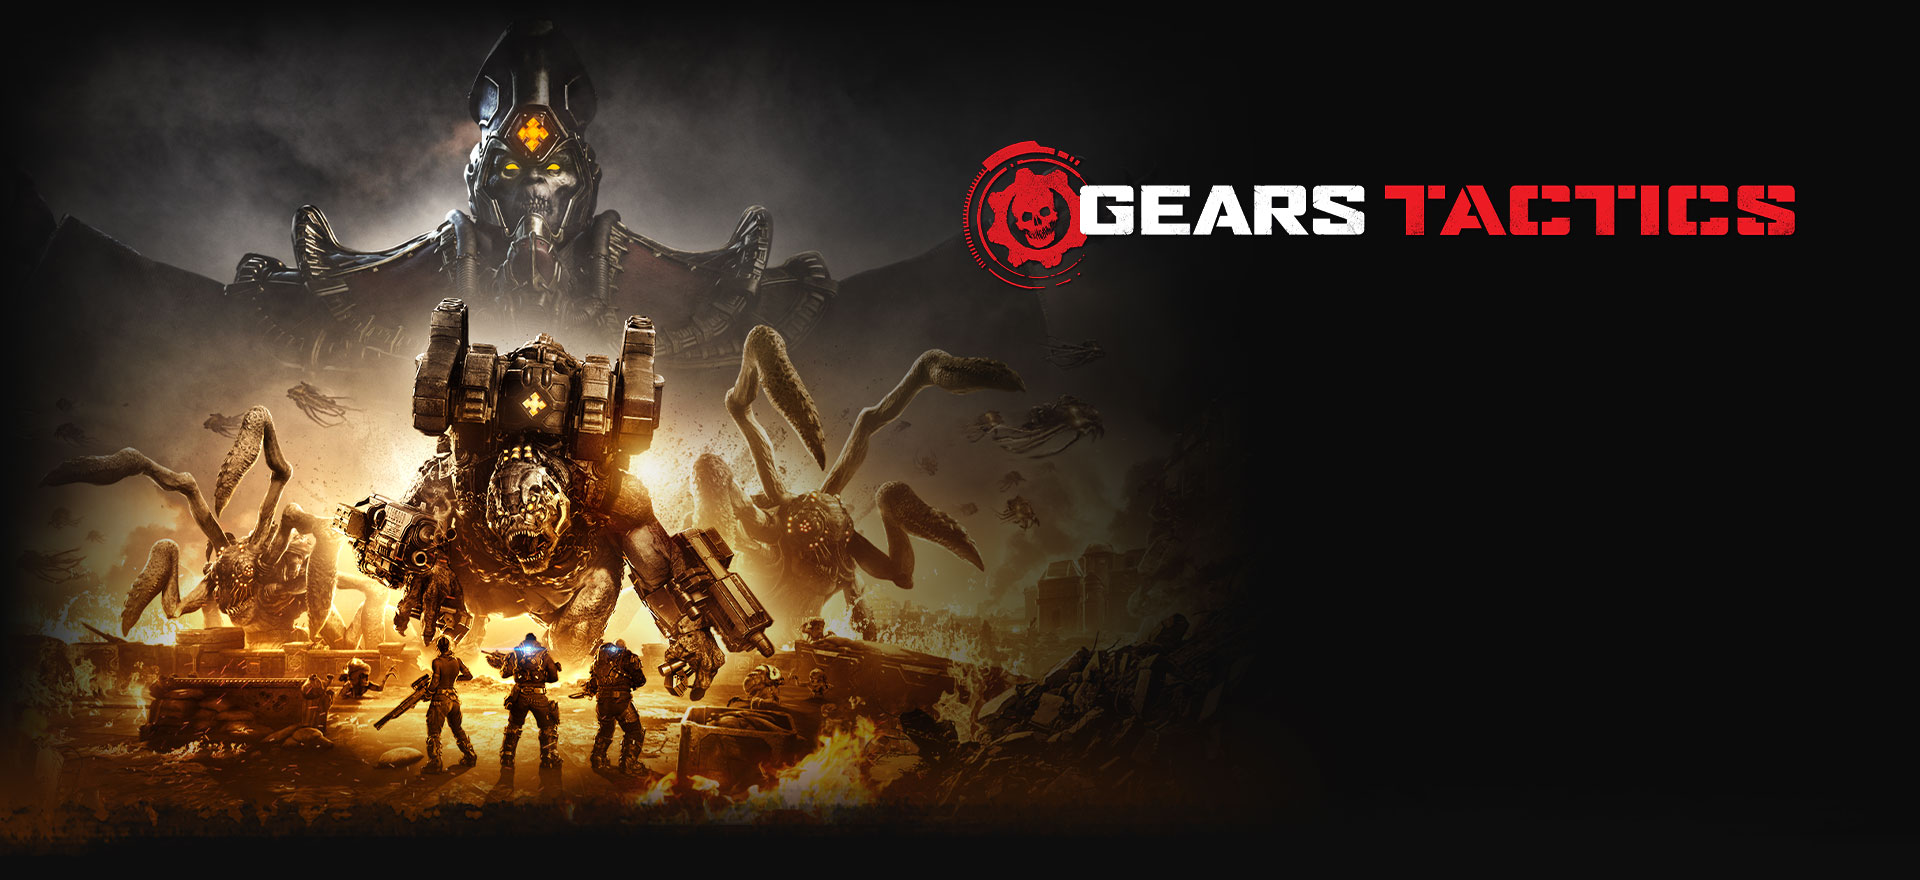 Gears Tactics, Three characters in heavy armour face large monsters in a burning war zone